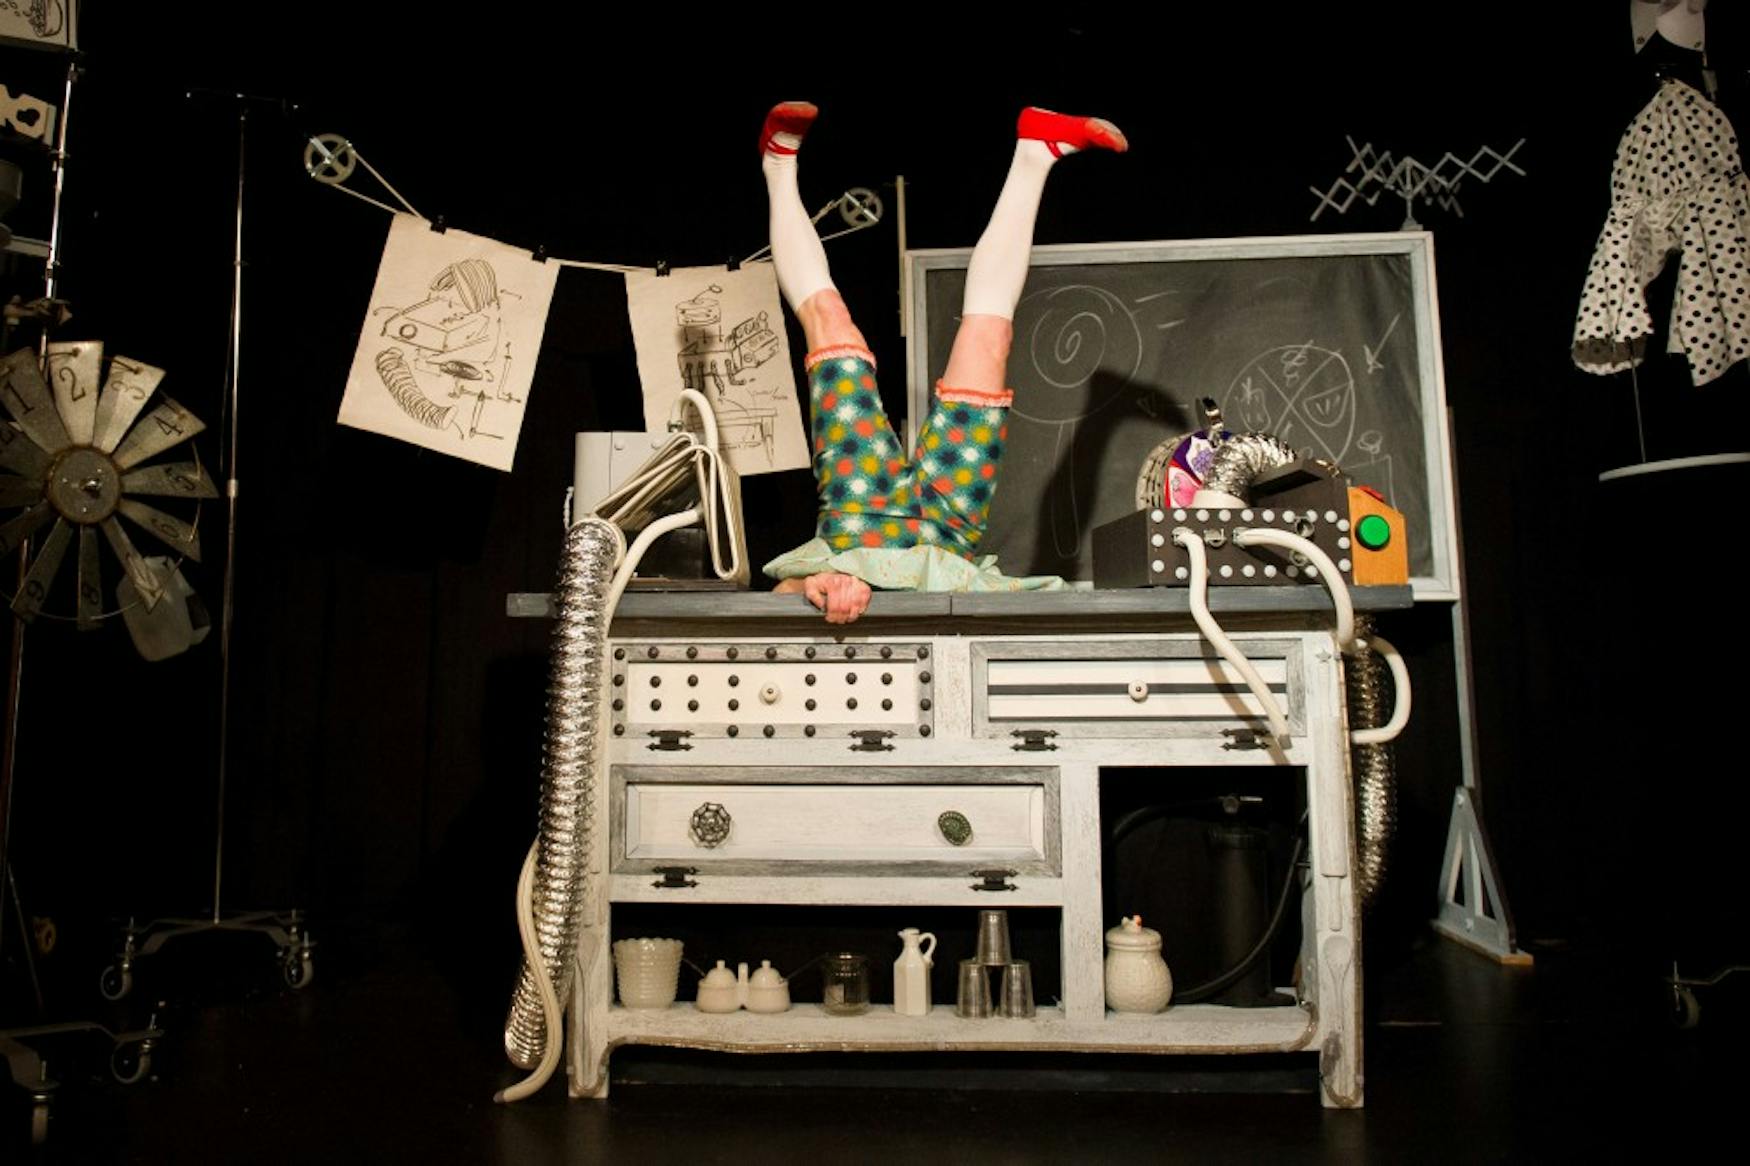 CLOWNING AROUND: Bonnie Duncan, a puppeteer who performed at the festival last year, will return to perform her original Lollipops for Breakfast for the Brandeis community—both the kids and the adults.